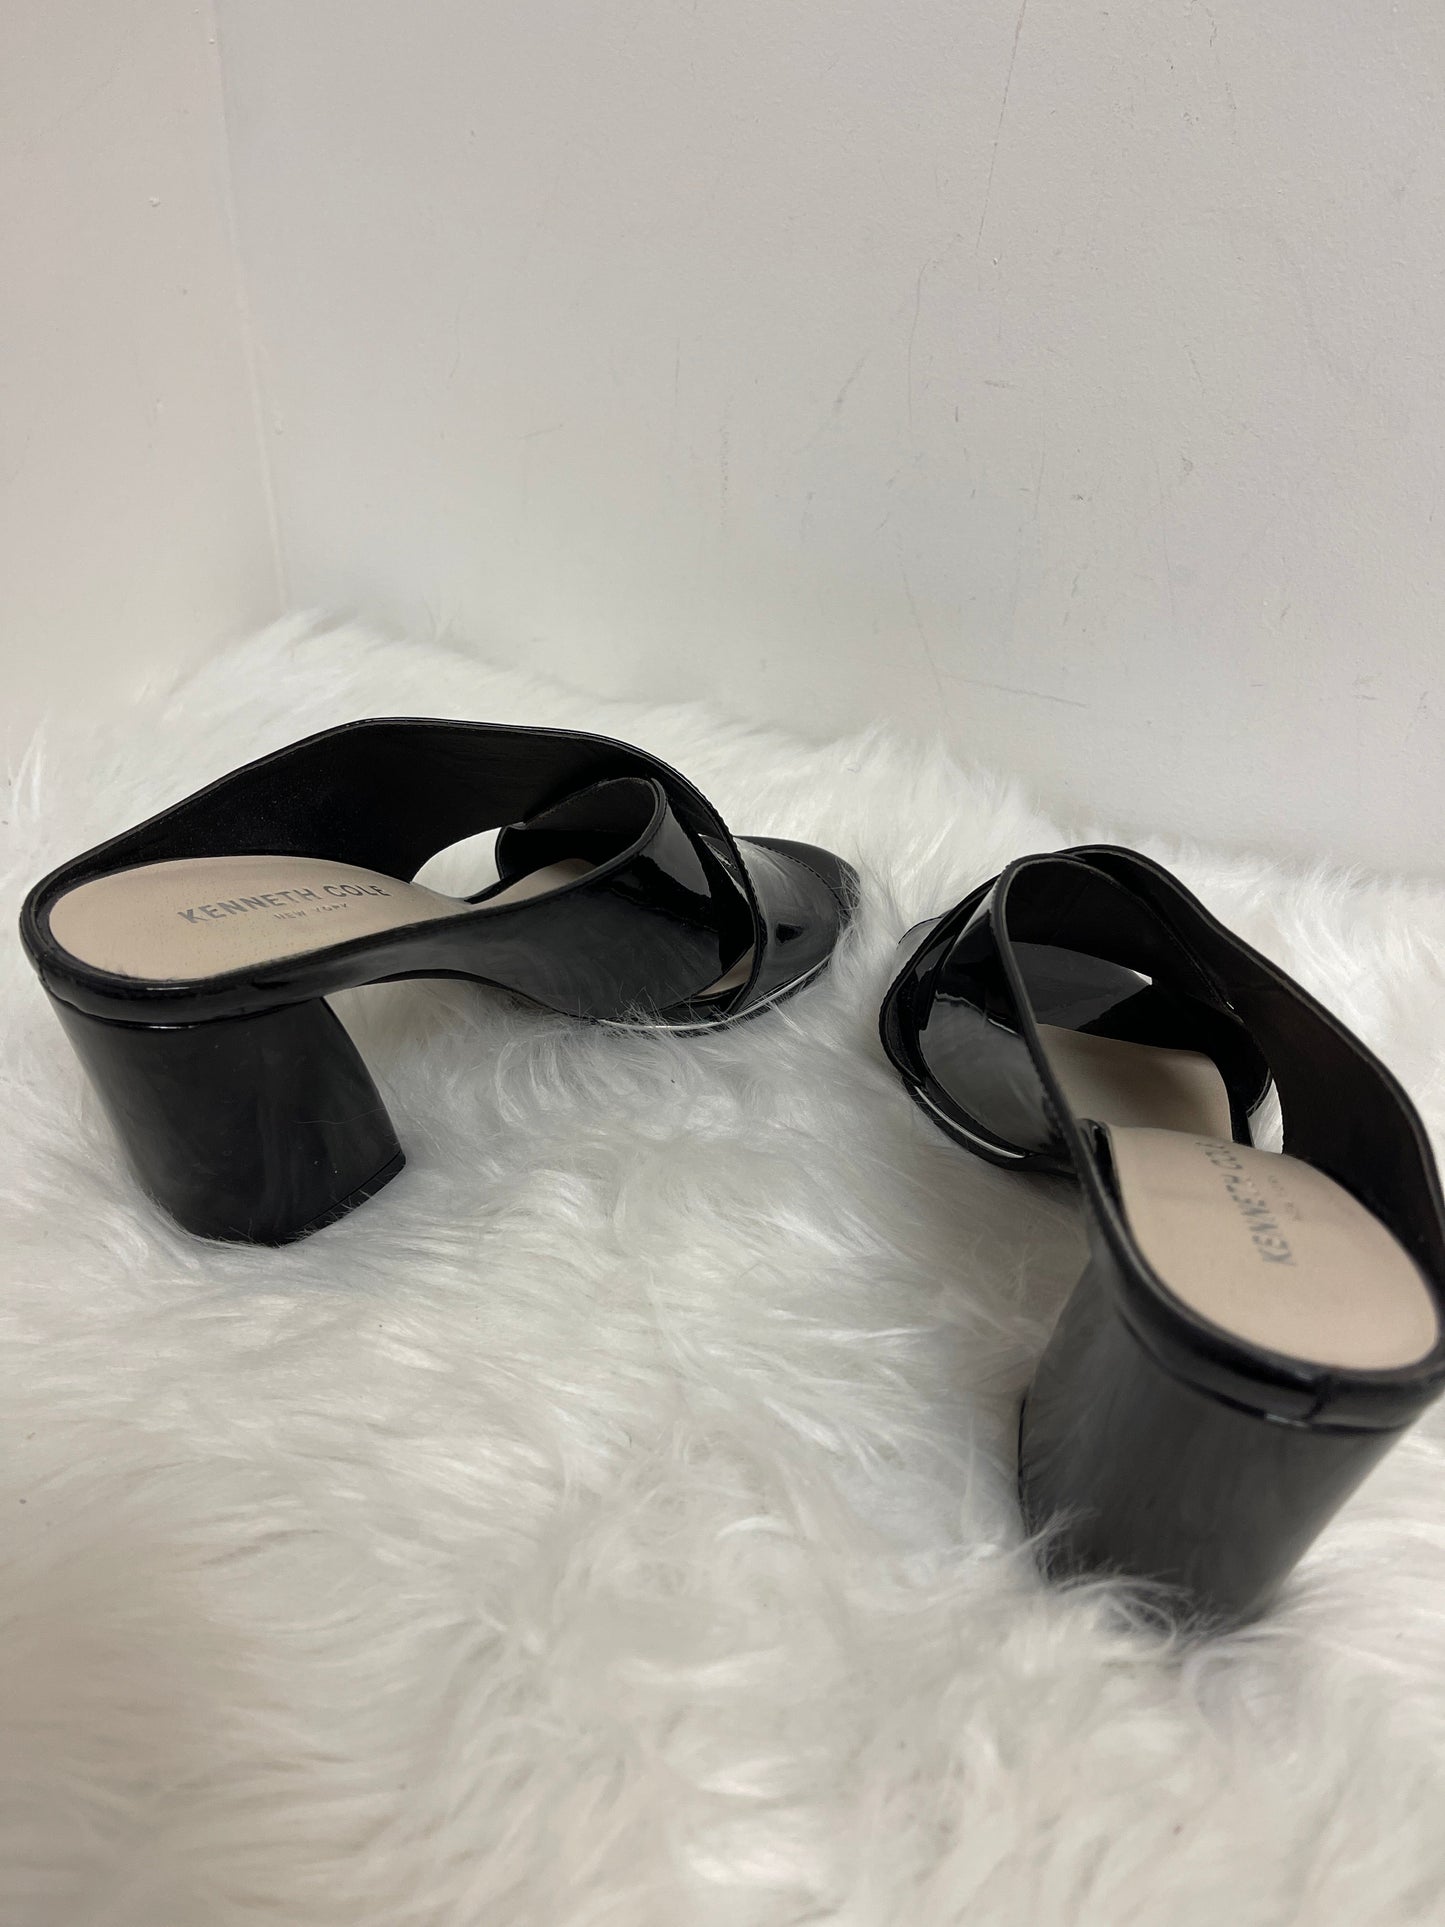 Black Shoes Heels Block Kenneth Cole, Size 8